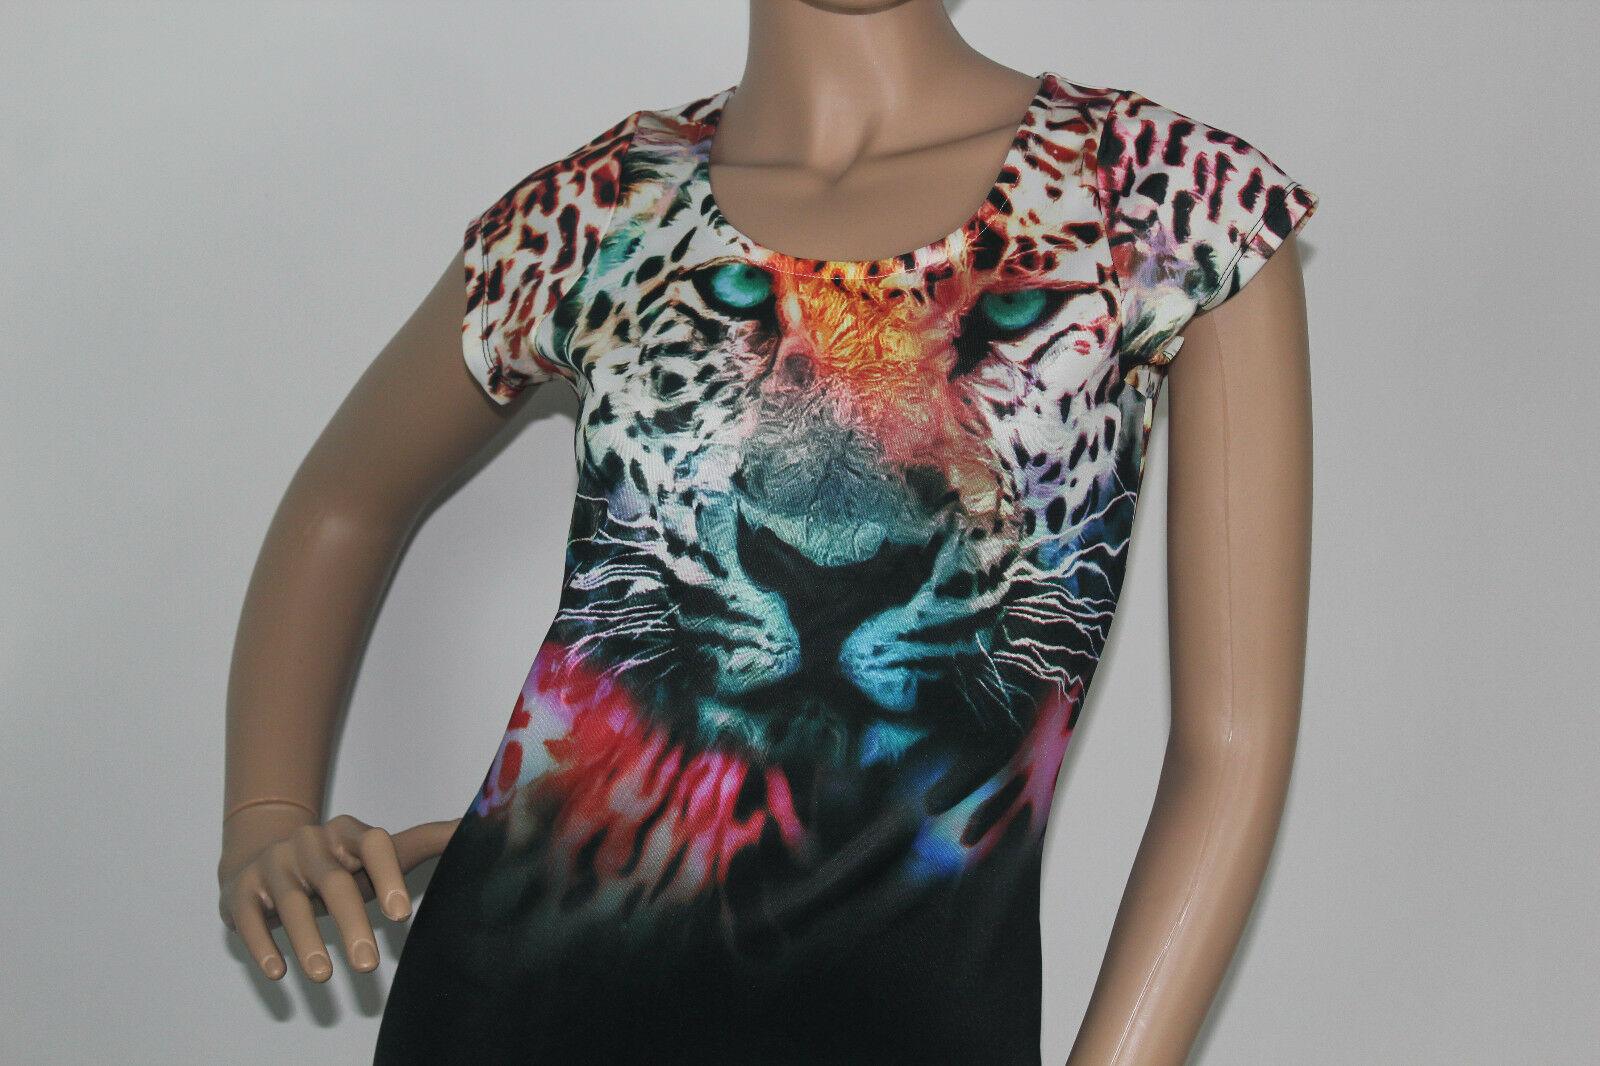 5th & LOVE  Cut Out Back Women's Dress Tiger Multi-Color Cap Sleeve  Size S - SVNYFancy